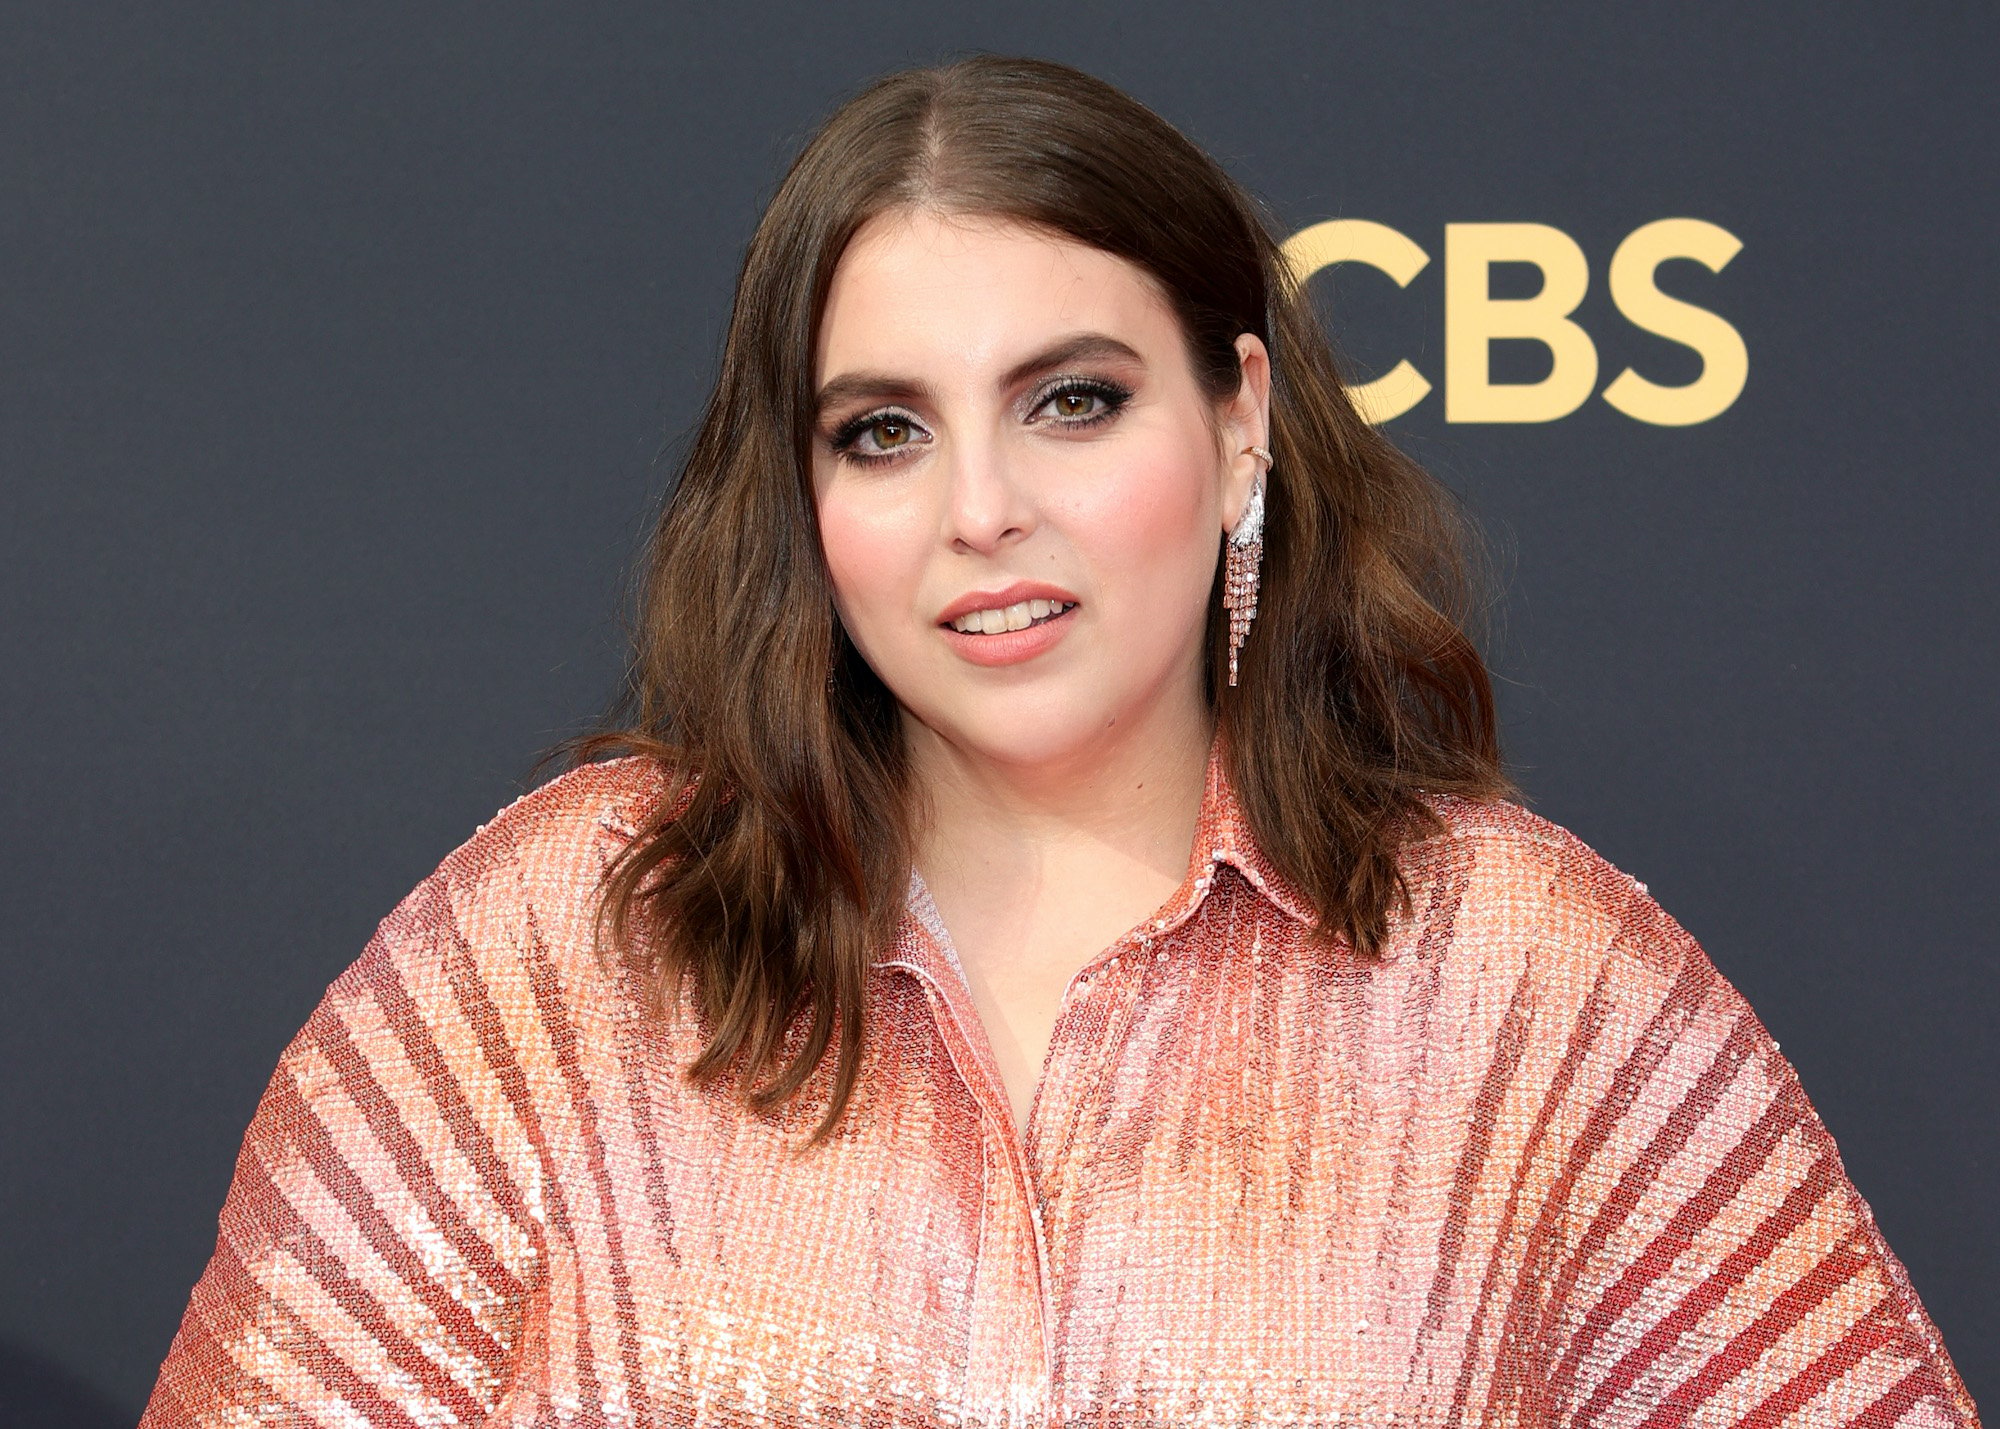 Actor Beanie Feldstein poses in a shimmering pink dress on the 2021 Emmy Awards red carpet.